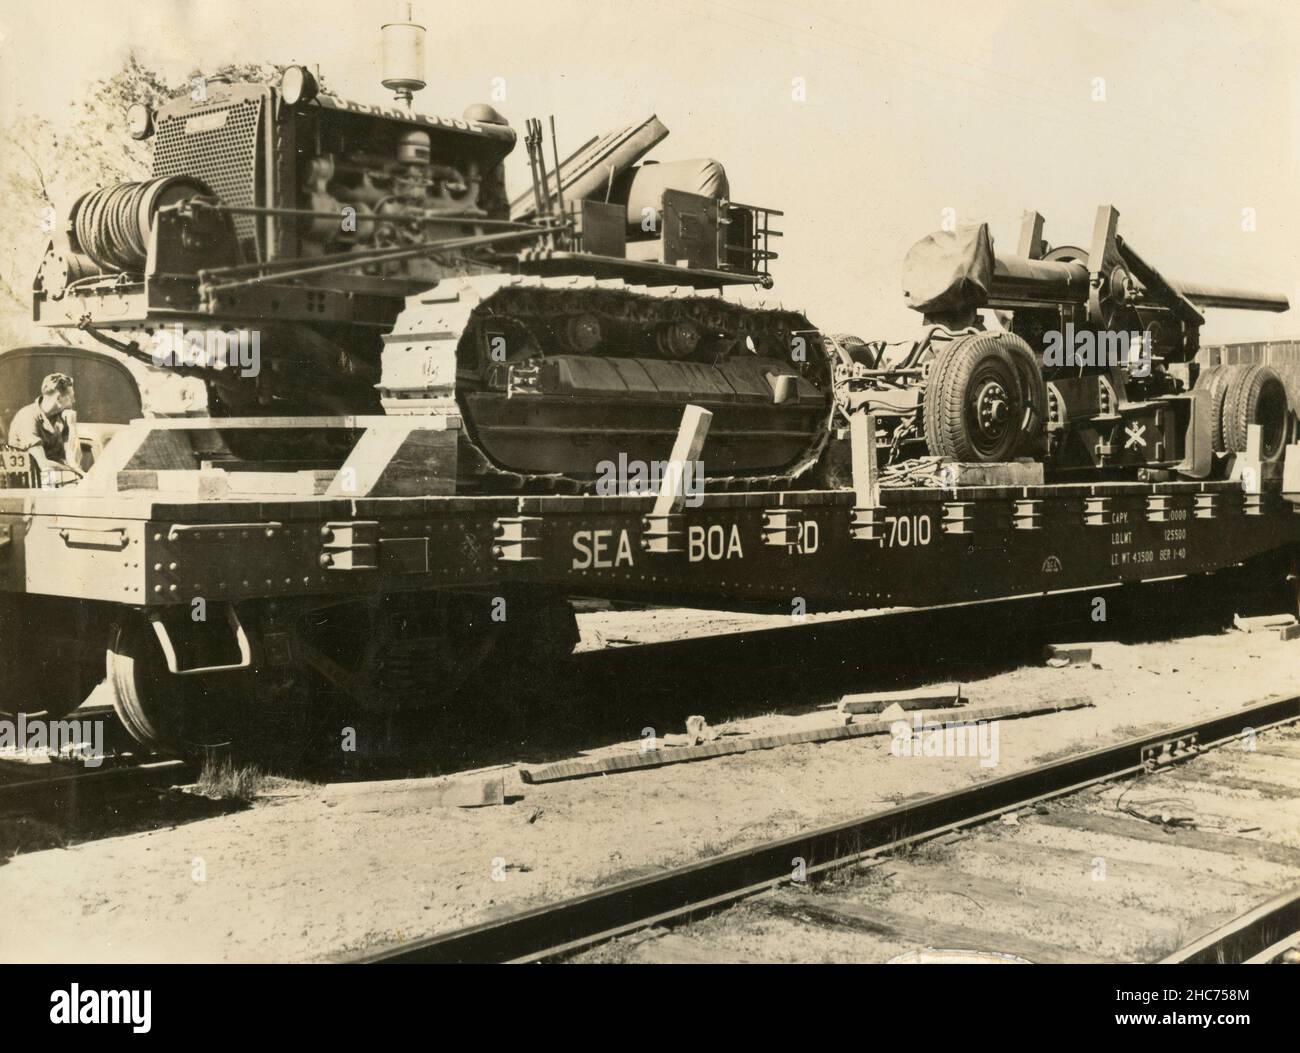 A US Army Caterpillar Tractor  and a 155mm Gun on a single flat car of the US Railroad Transport, USA 1940s Stock Photo